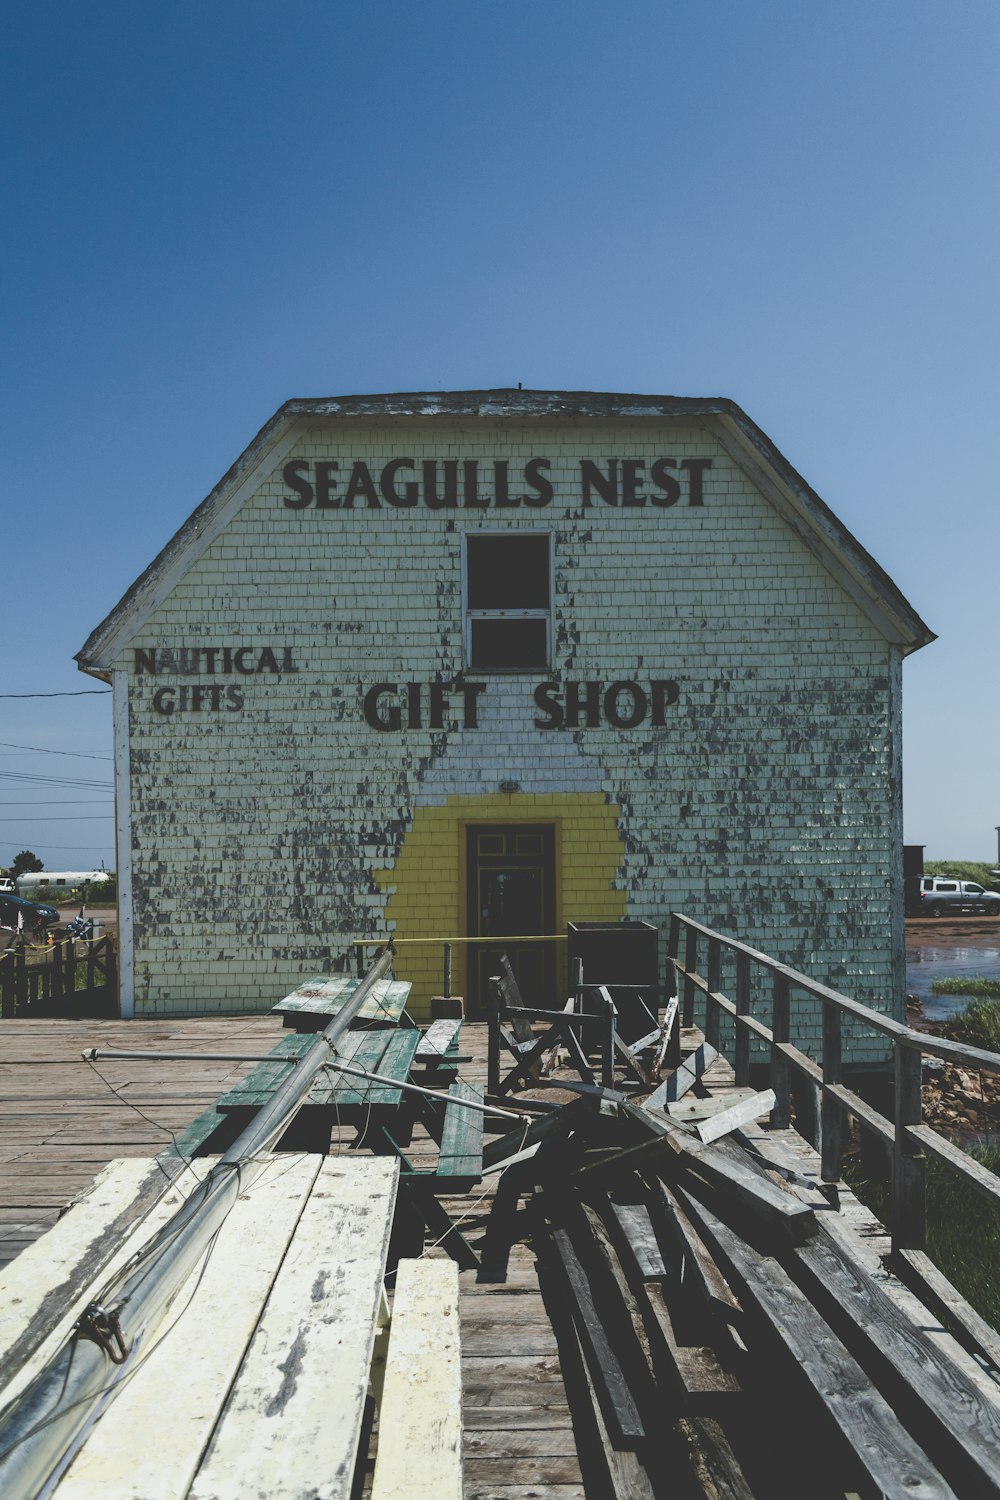 Seagulls Nest shed